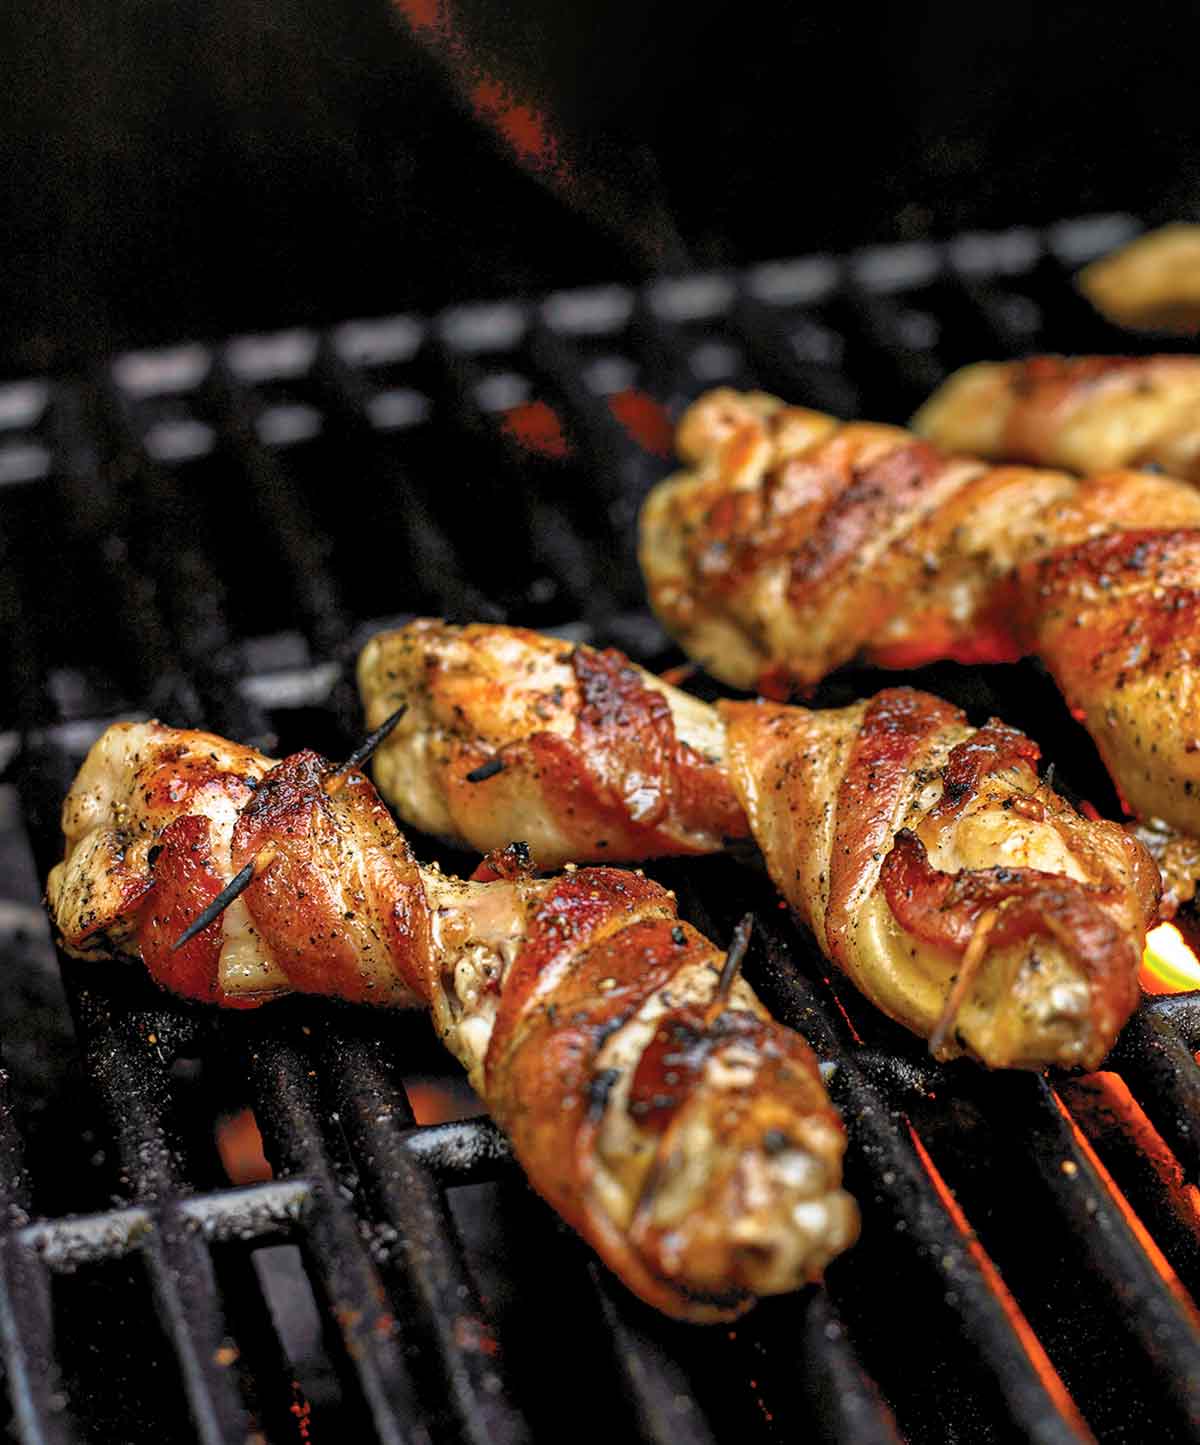 Several bacon-wrapped chicken wings on a grill grate with flame below.